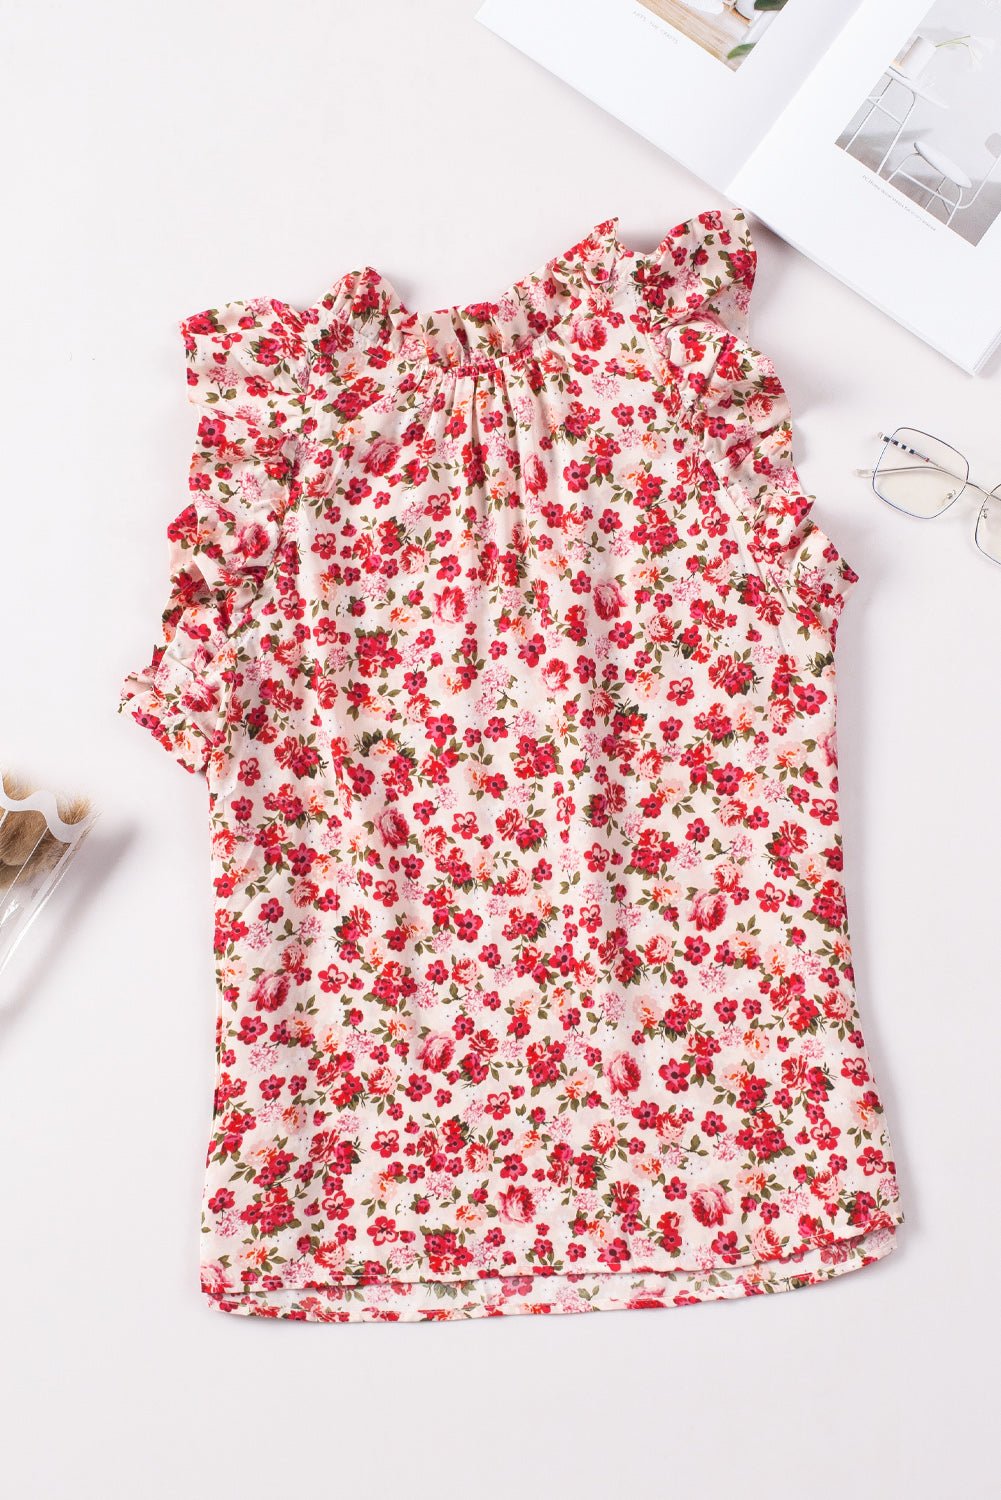 Floral Ruffle Sleeveless Top - EMMY